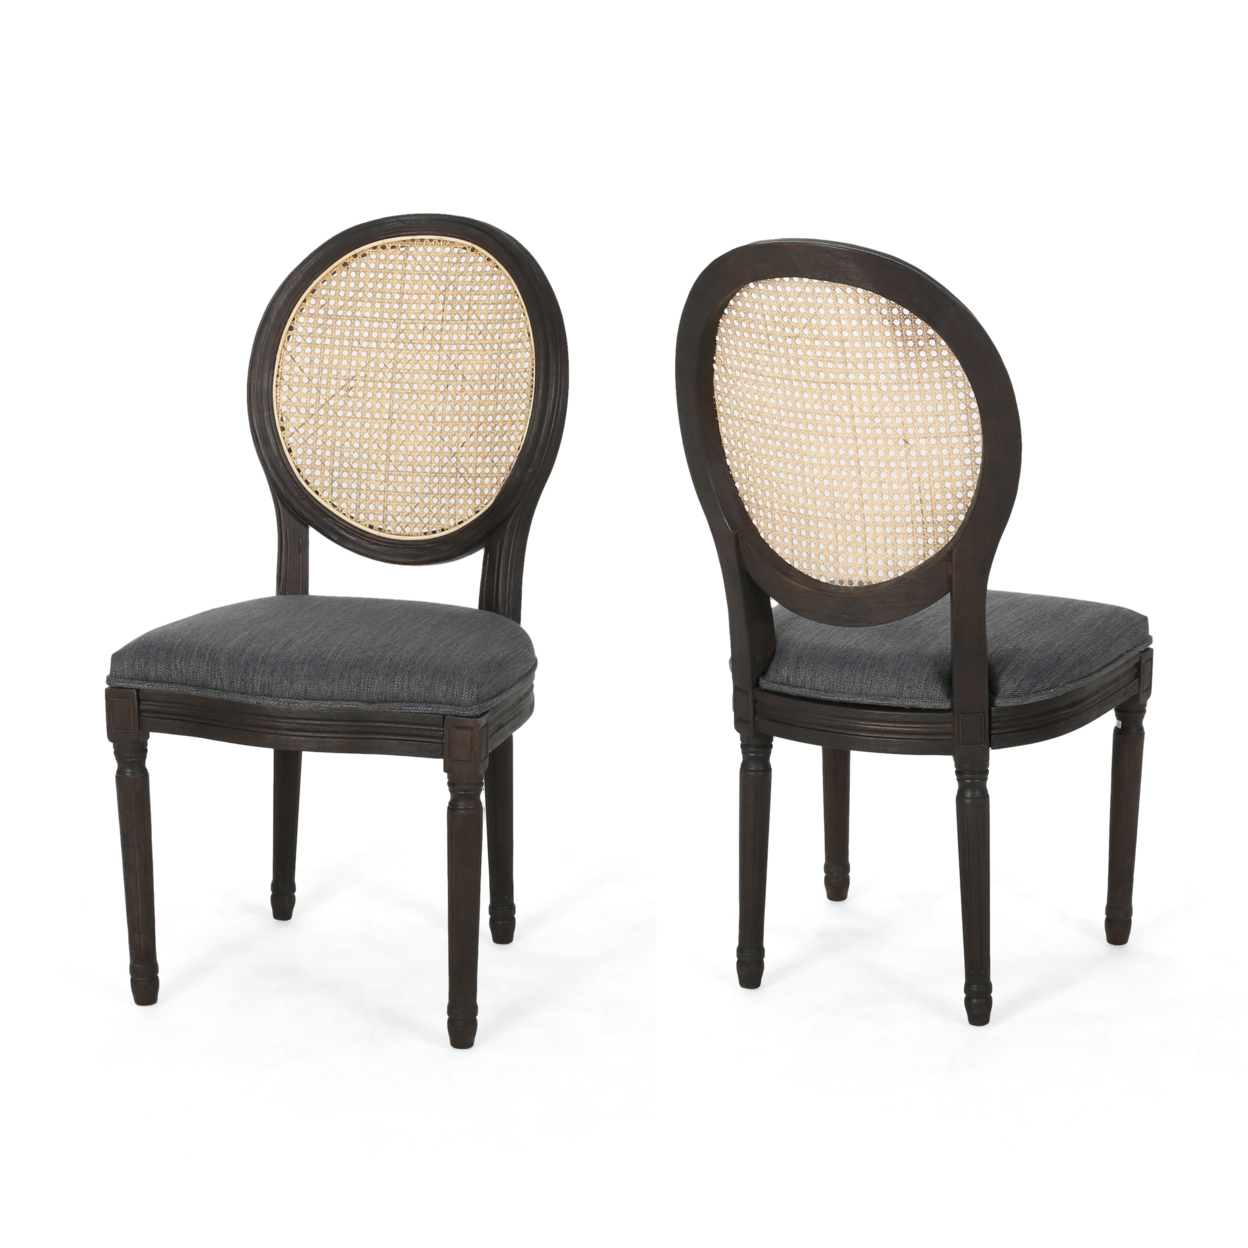 Laney Wooden Dining Chairs With Beige Cushions (Set Of 2) - Charcoal + Natural + Black